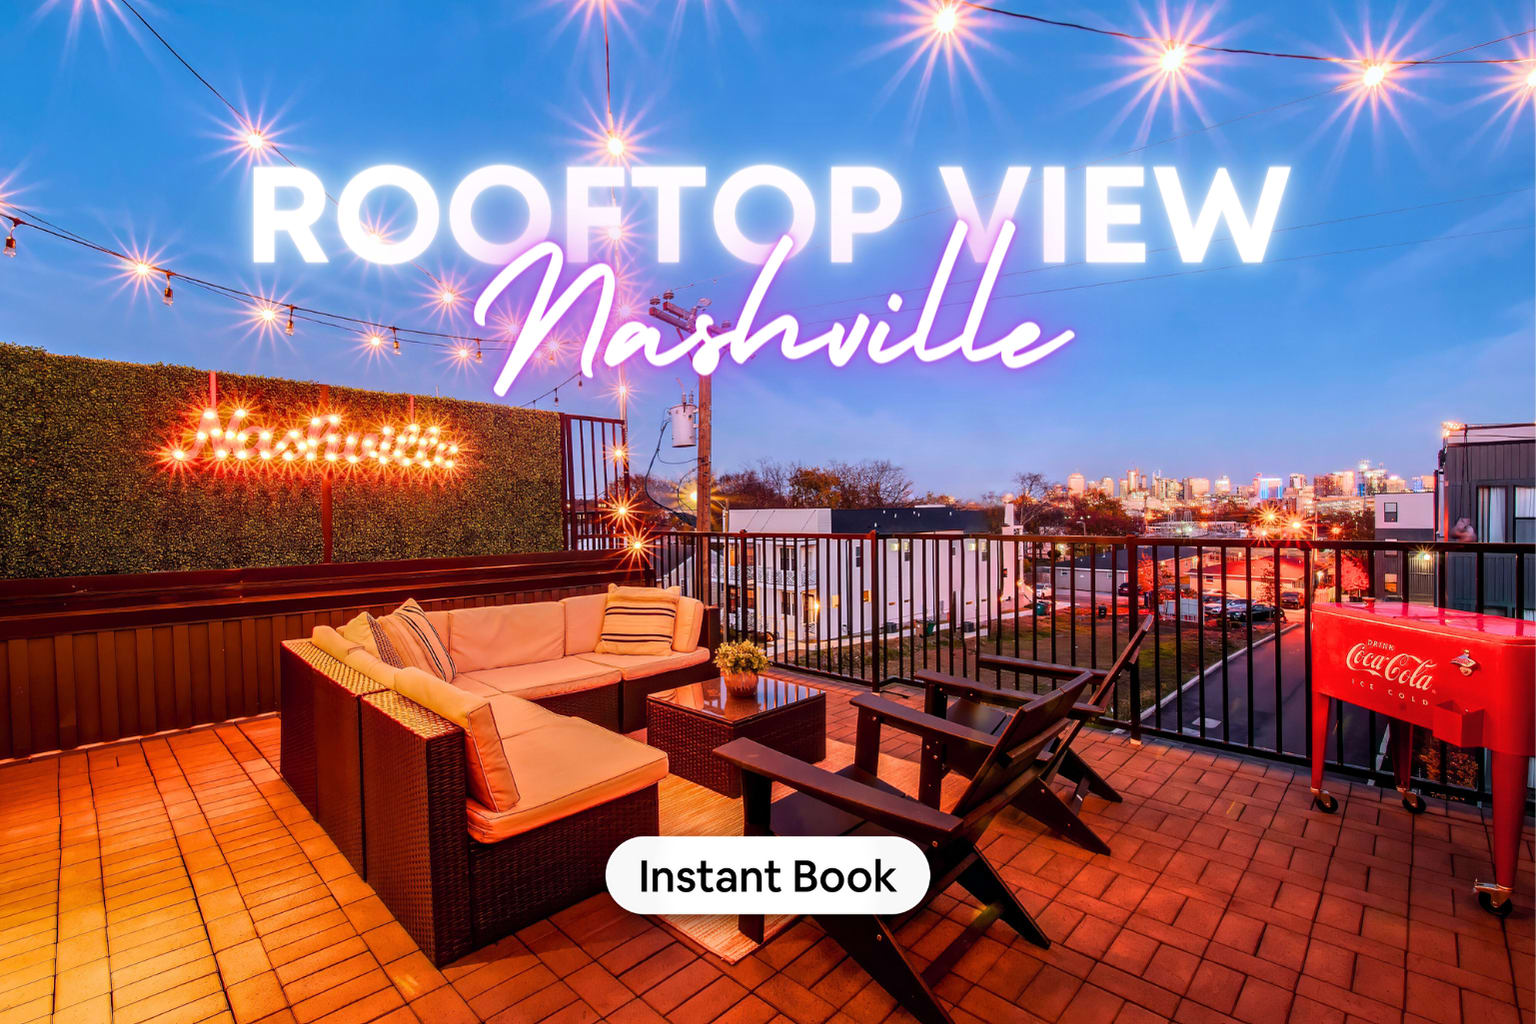 Experience luxury and Music City charm on this Nashville rooftop, a perfect hideaway for bachelorette celebrations or family holidays. Twilight settles elegantly as you lounge amidst plush seating, savoring skyline views under twinkling lights, with a cool beverage from the classic Coke cooler. It's an iconic backdrop for making lasting memories.

Book now with Misfit Homes.